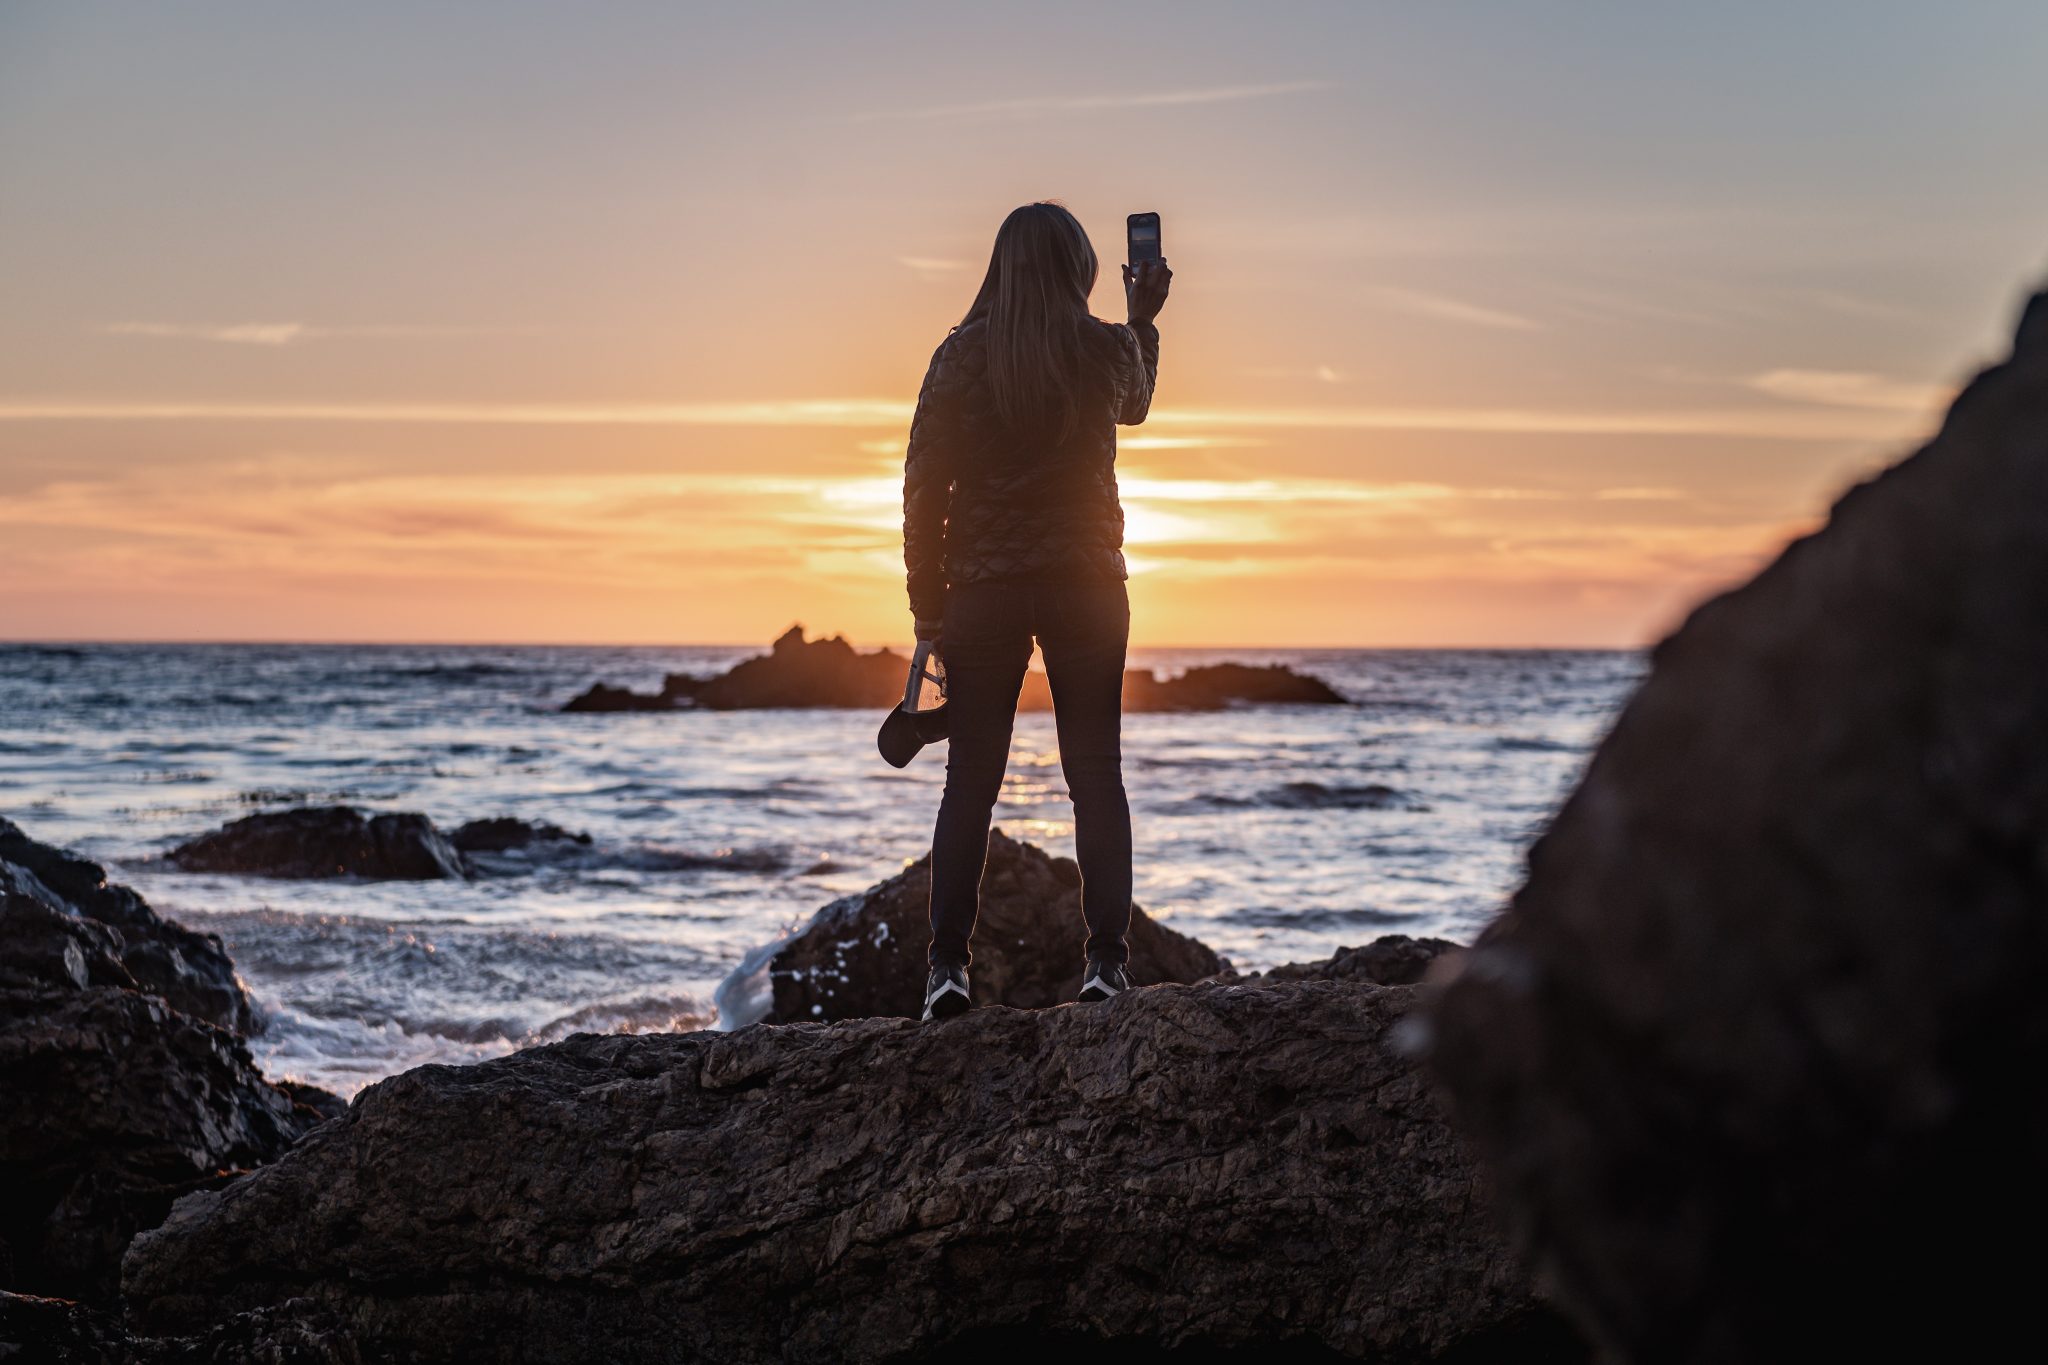 silhouette of woman standing on rock formation near body of water during sunset